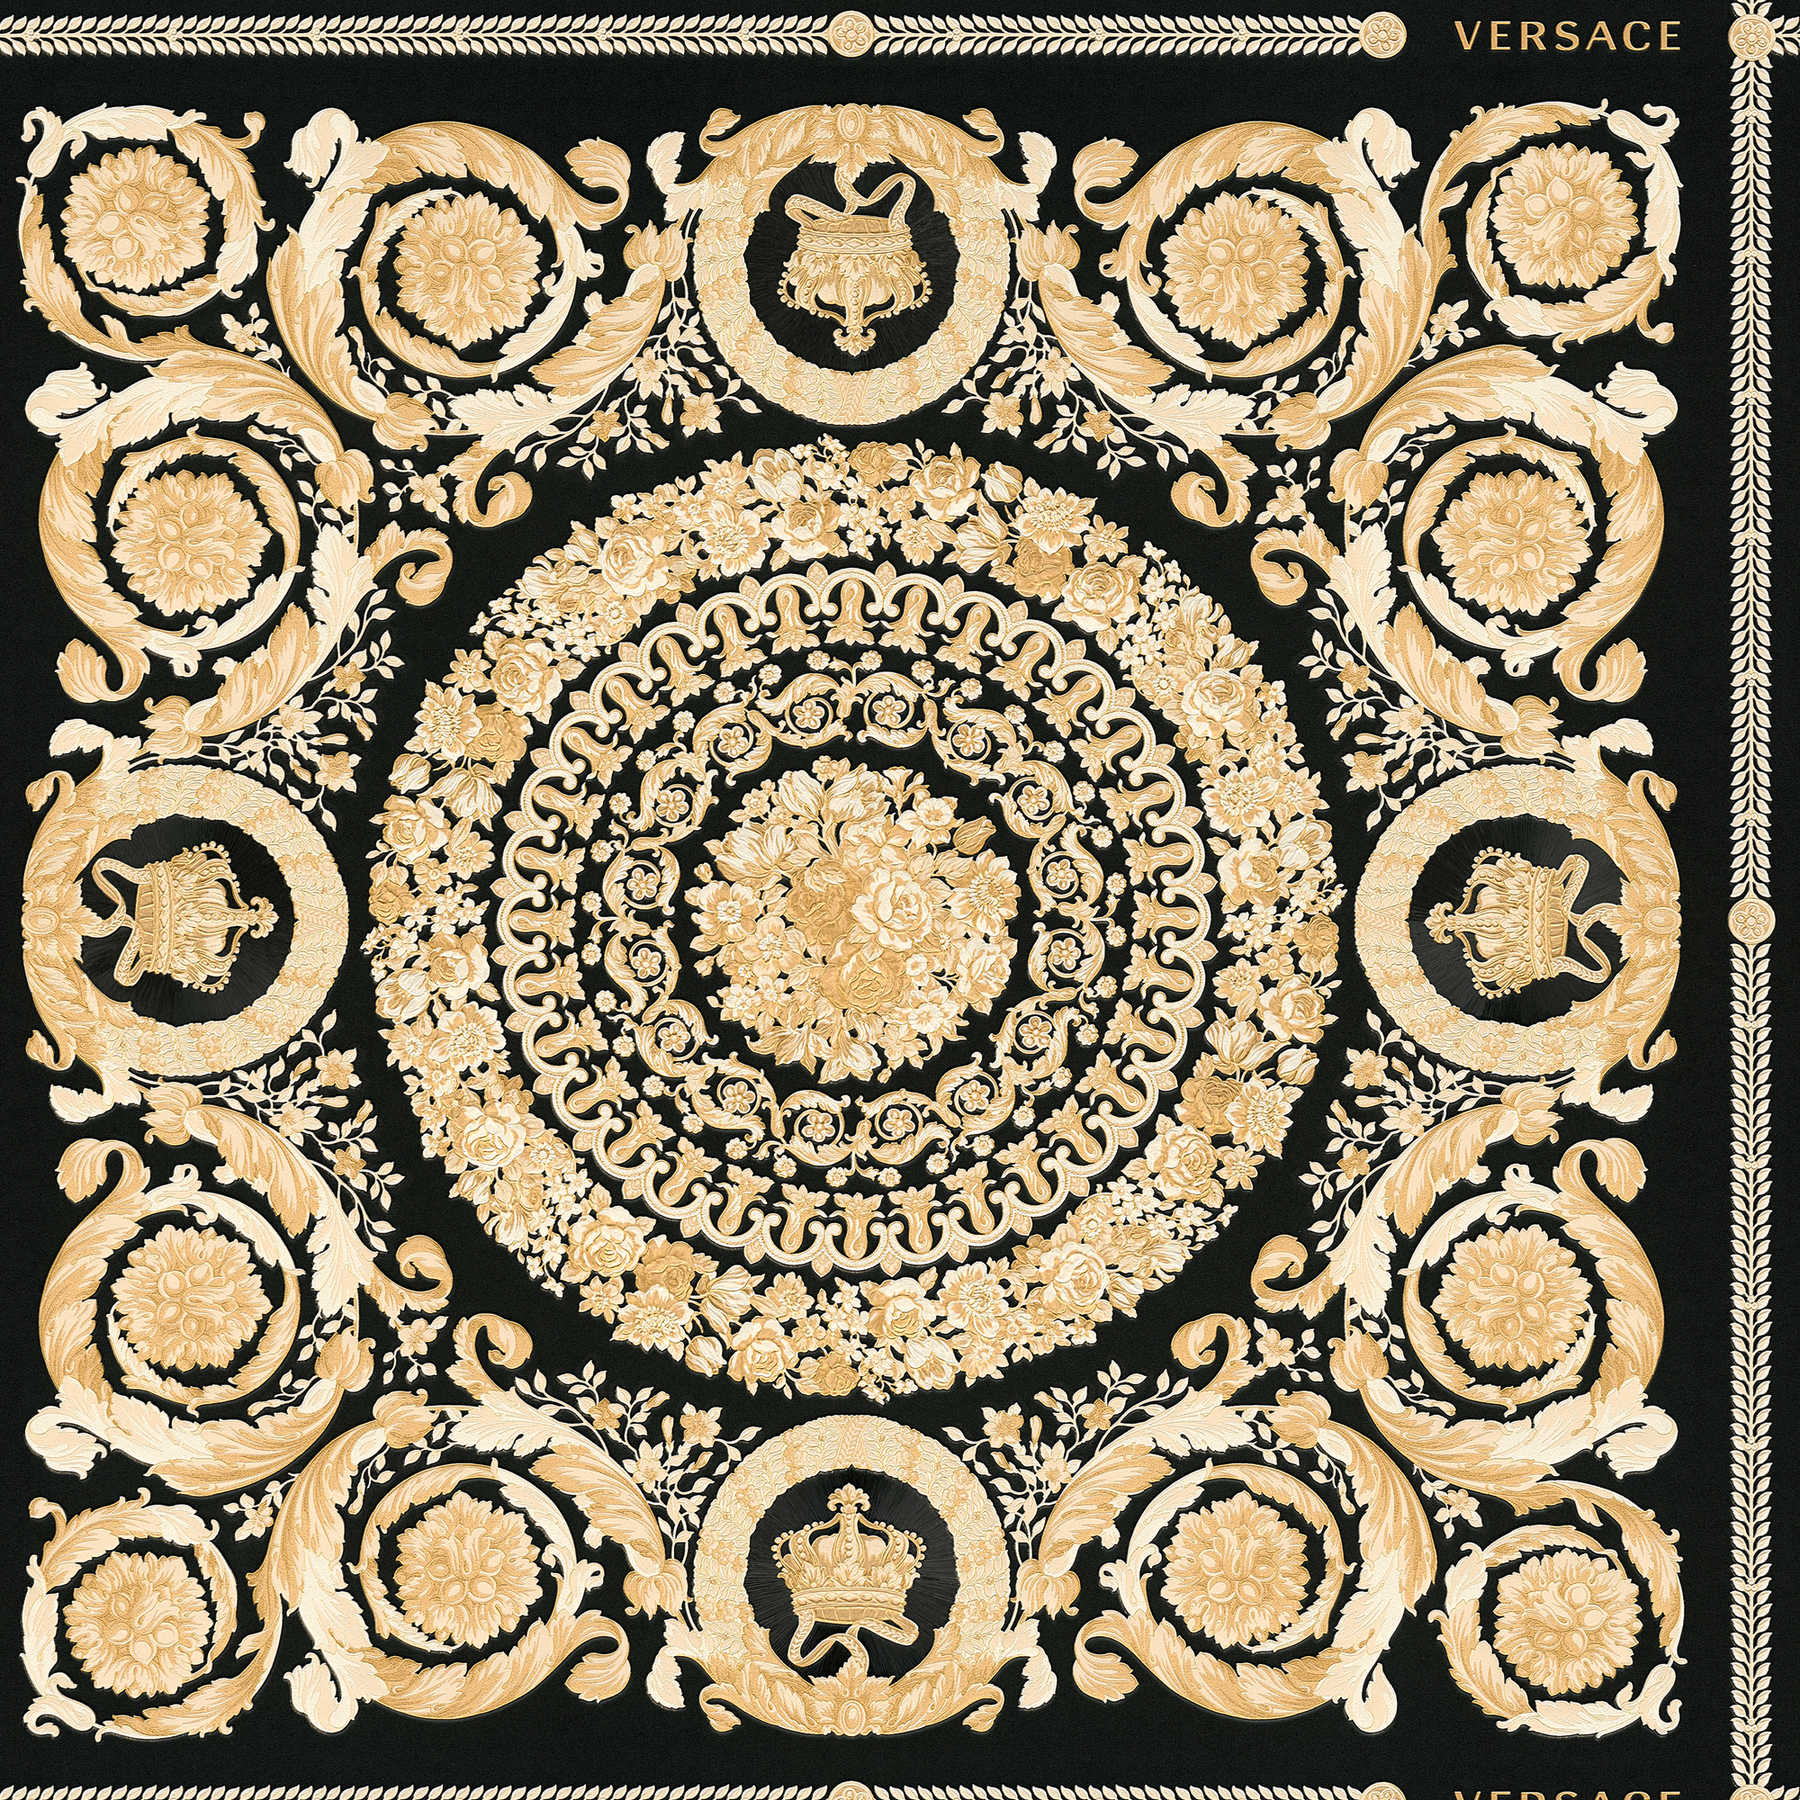 Luxury VERSACE Home wallpaper crowns & roses - black, gold, cream
